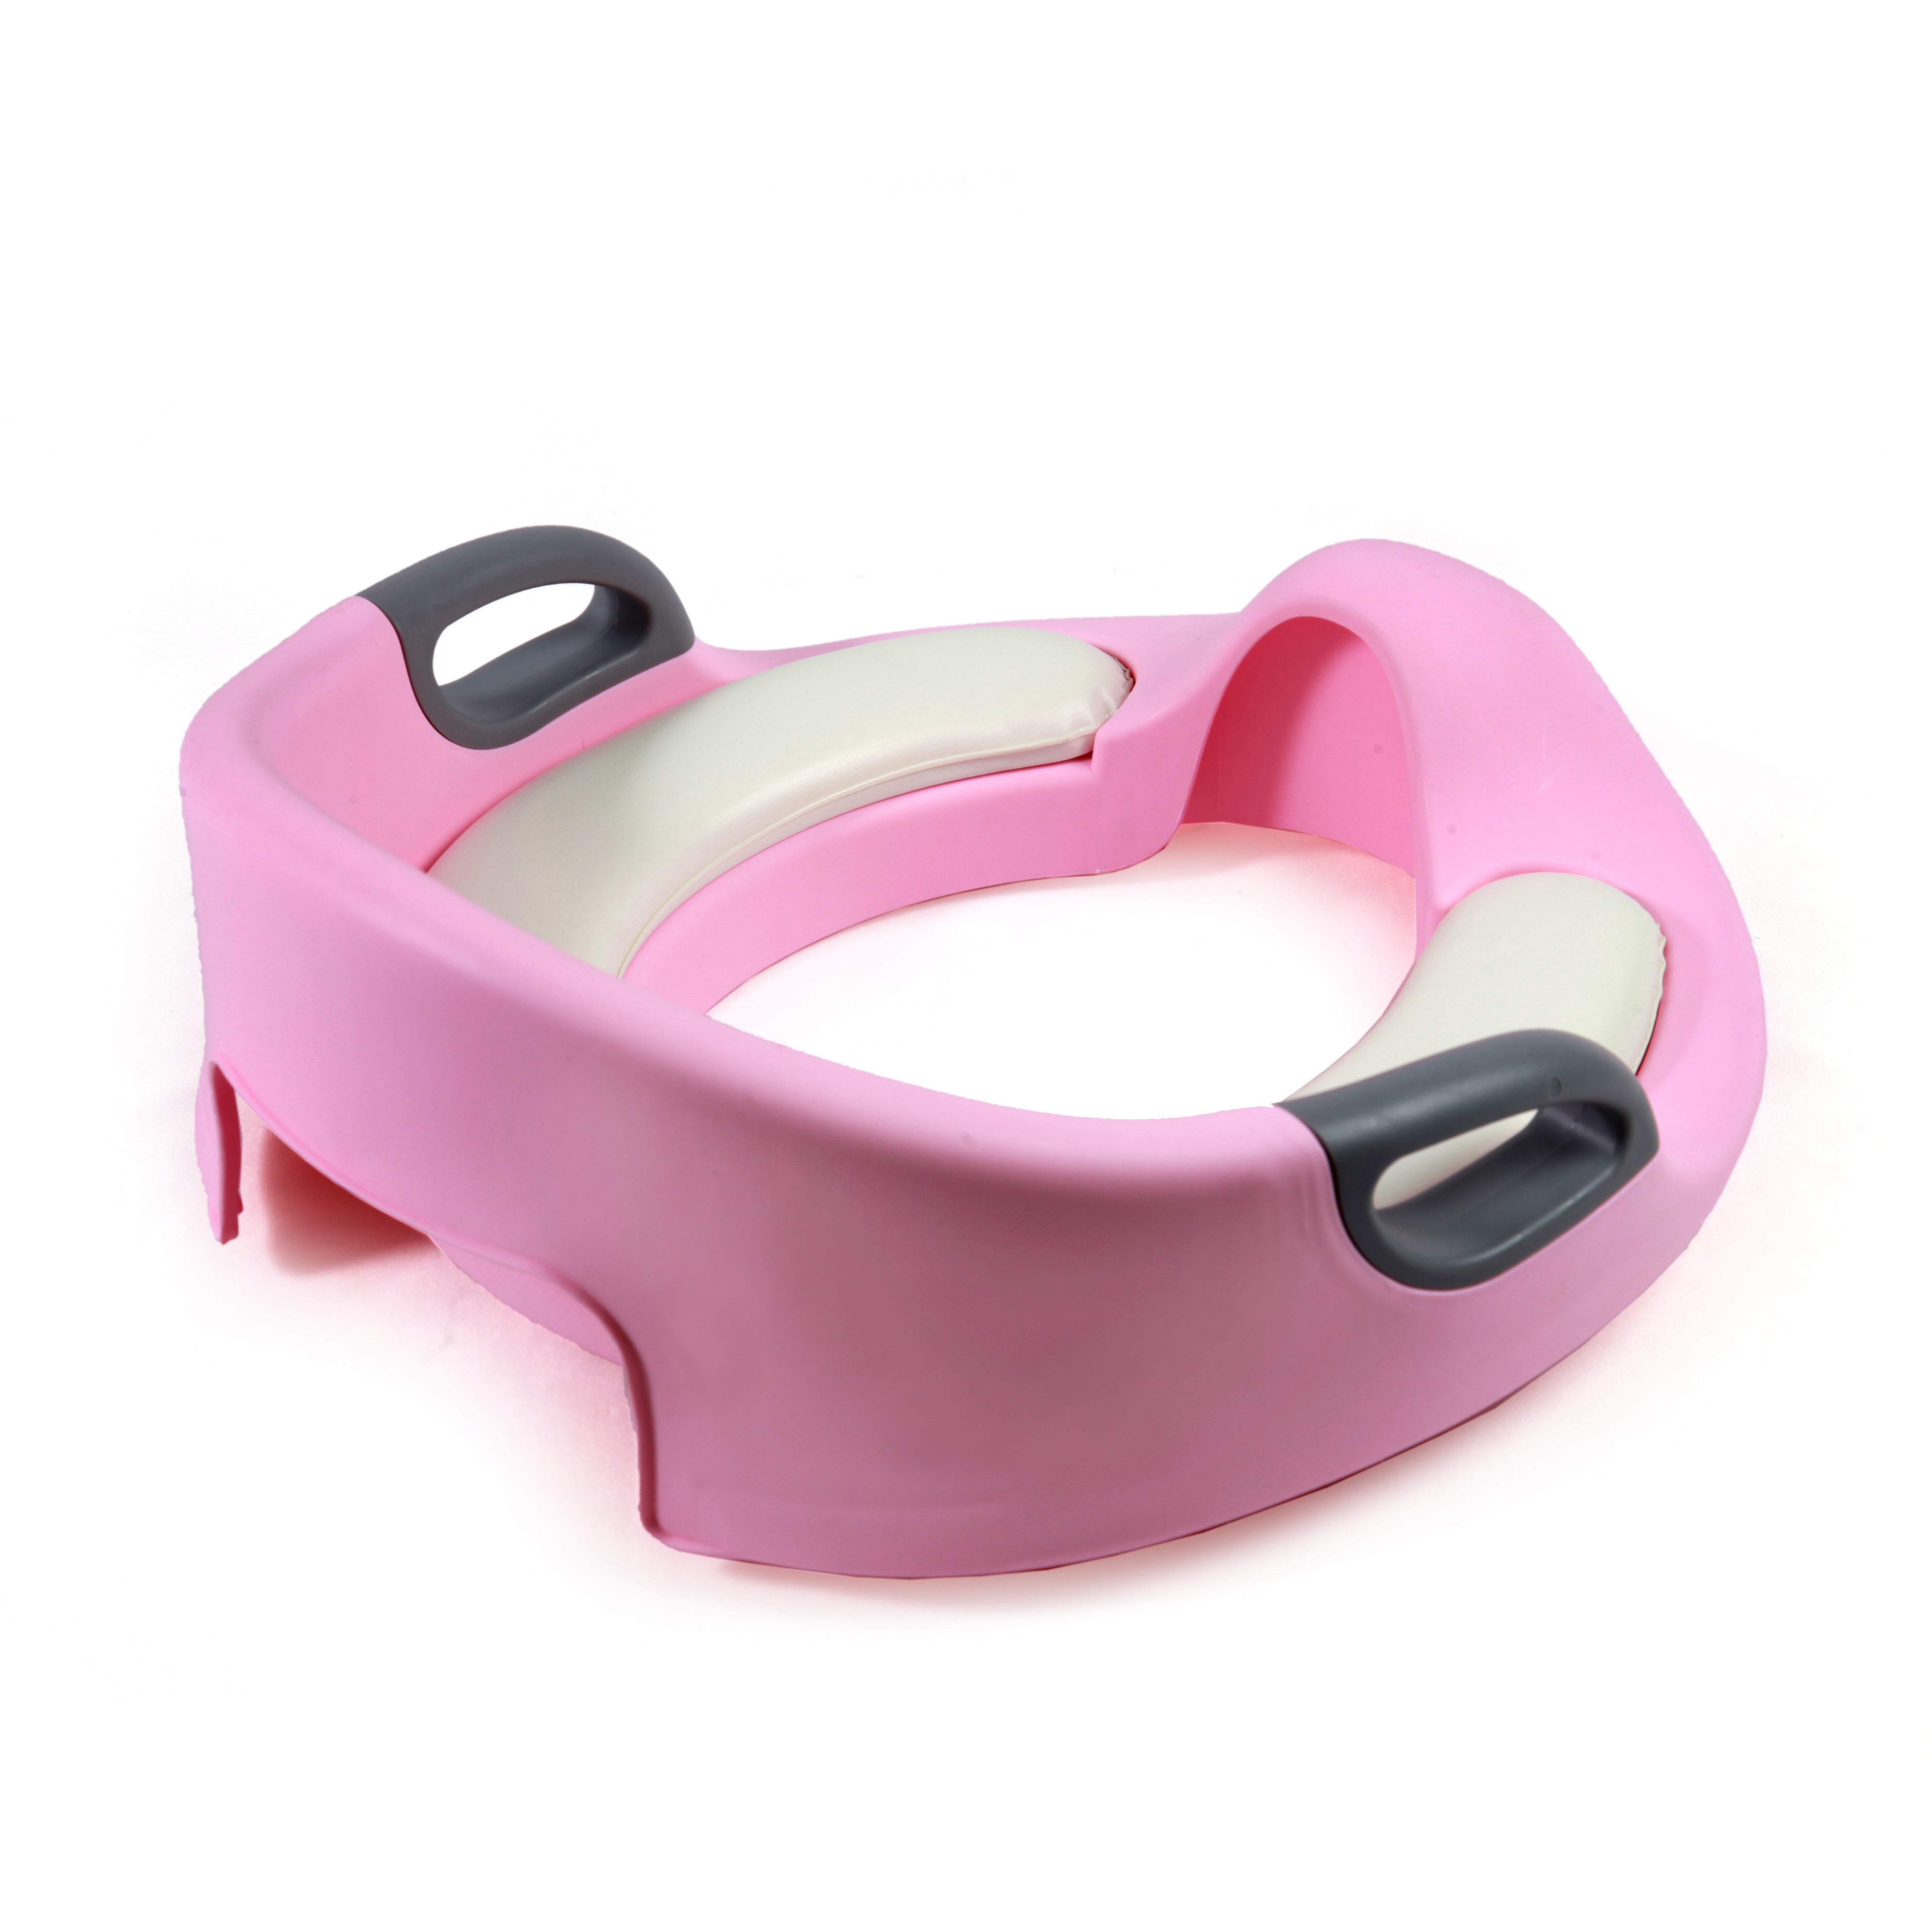 I Got Your Back Pink Cushioned Potty Seat